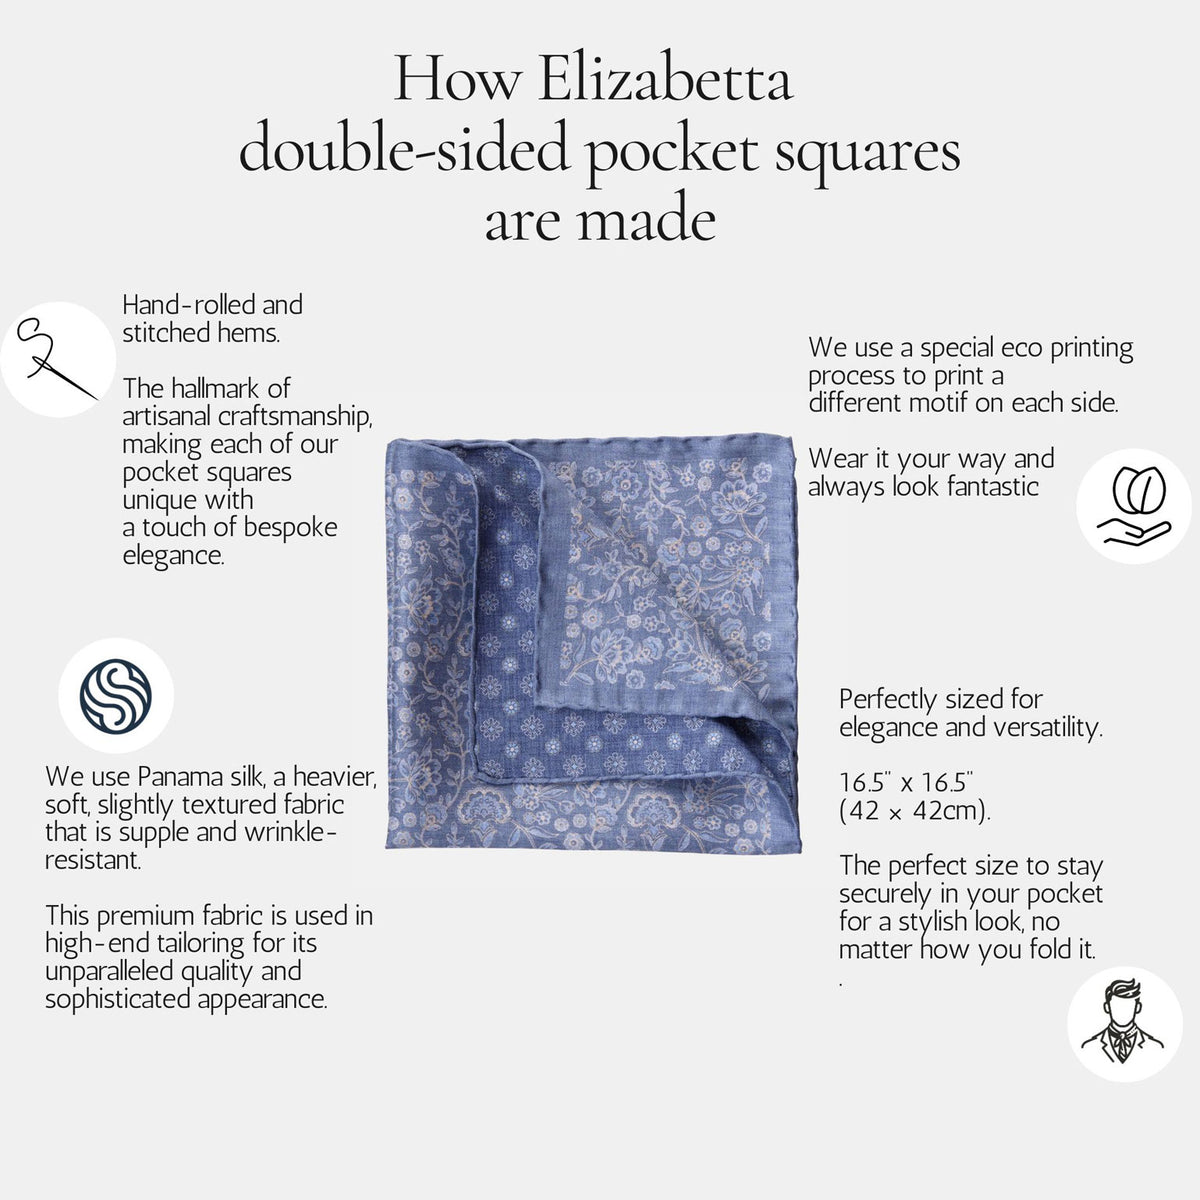 How Elizabetta double-sided pocket square is made